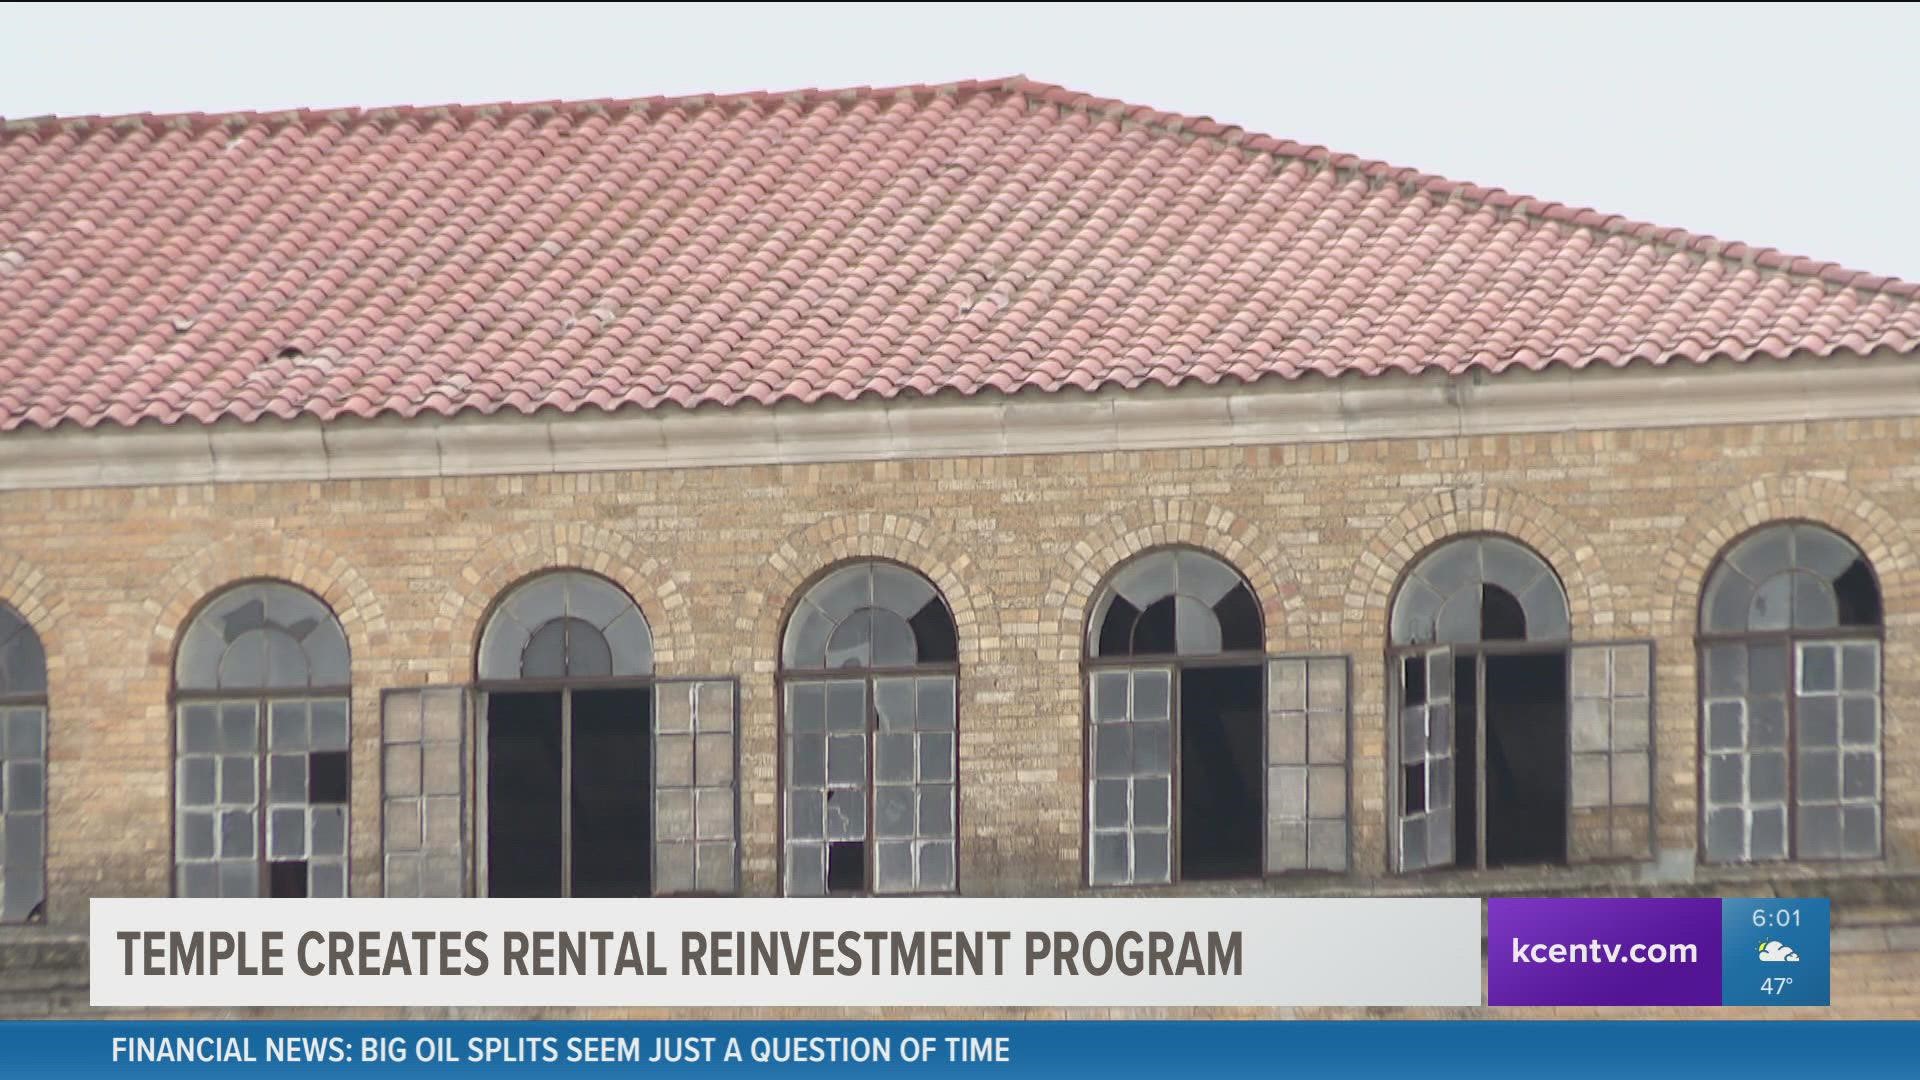 Temple's Rental Reinvestment Program offers property owners the opportunity to apply for grants to renovate rental housing in low to moderate-income areas.